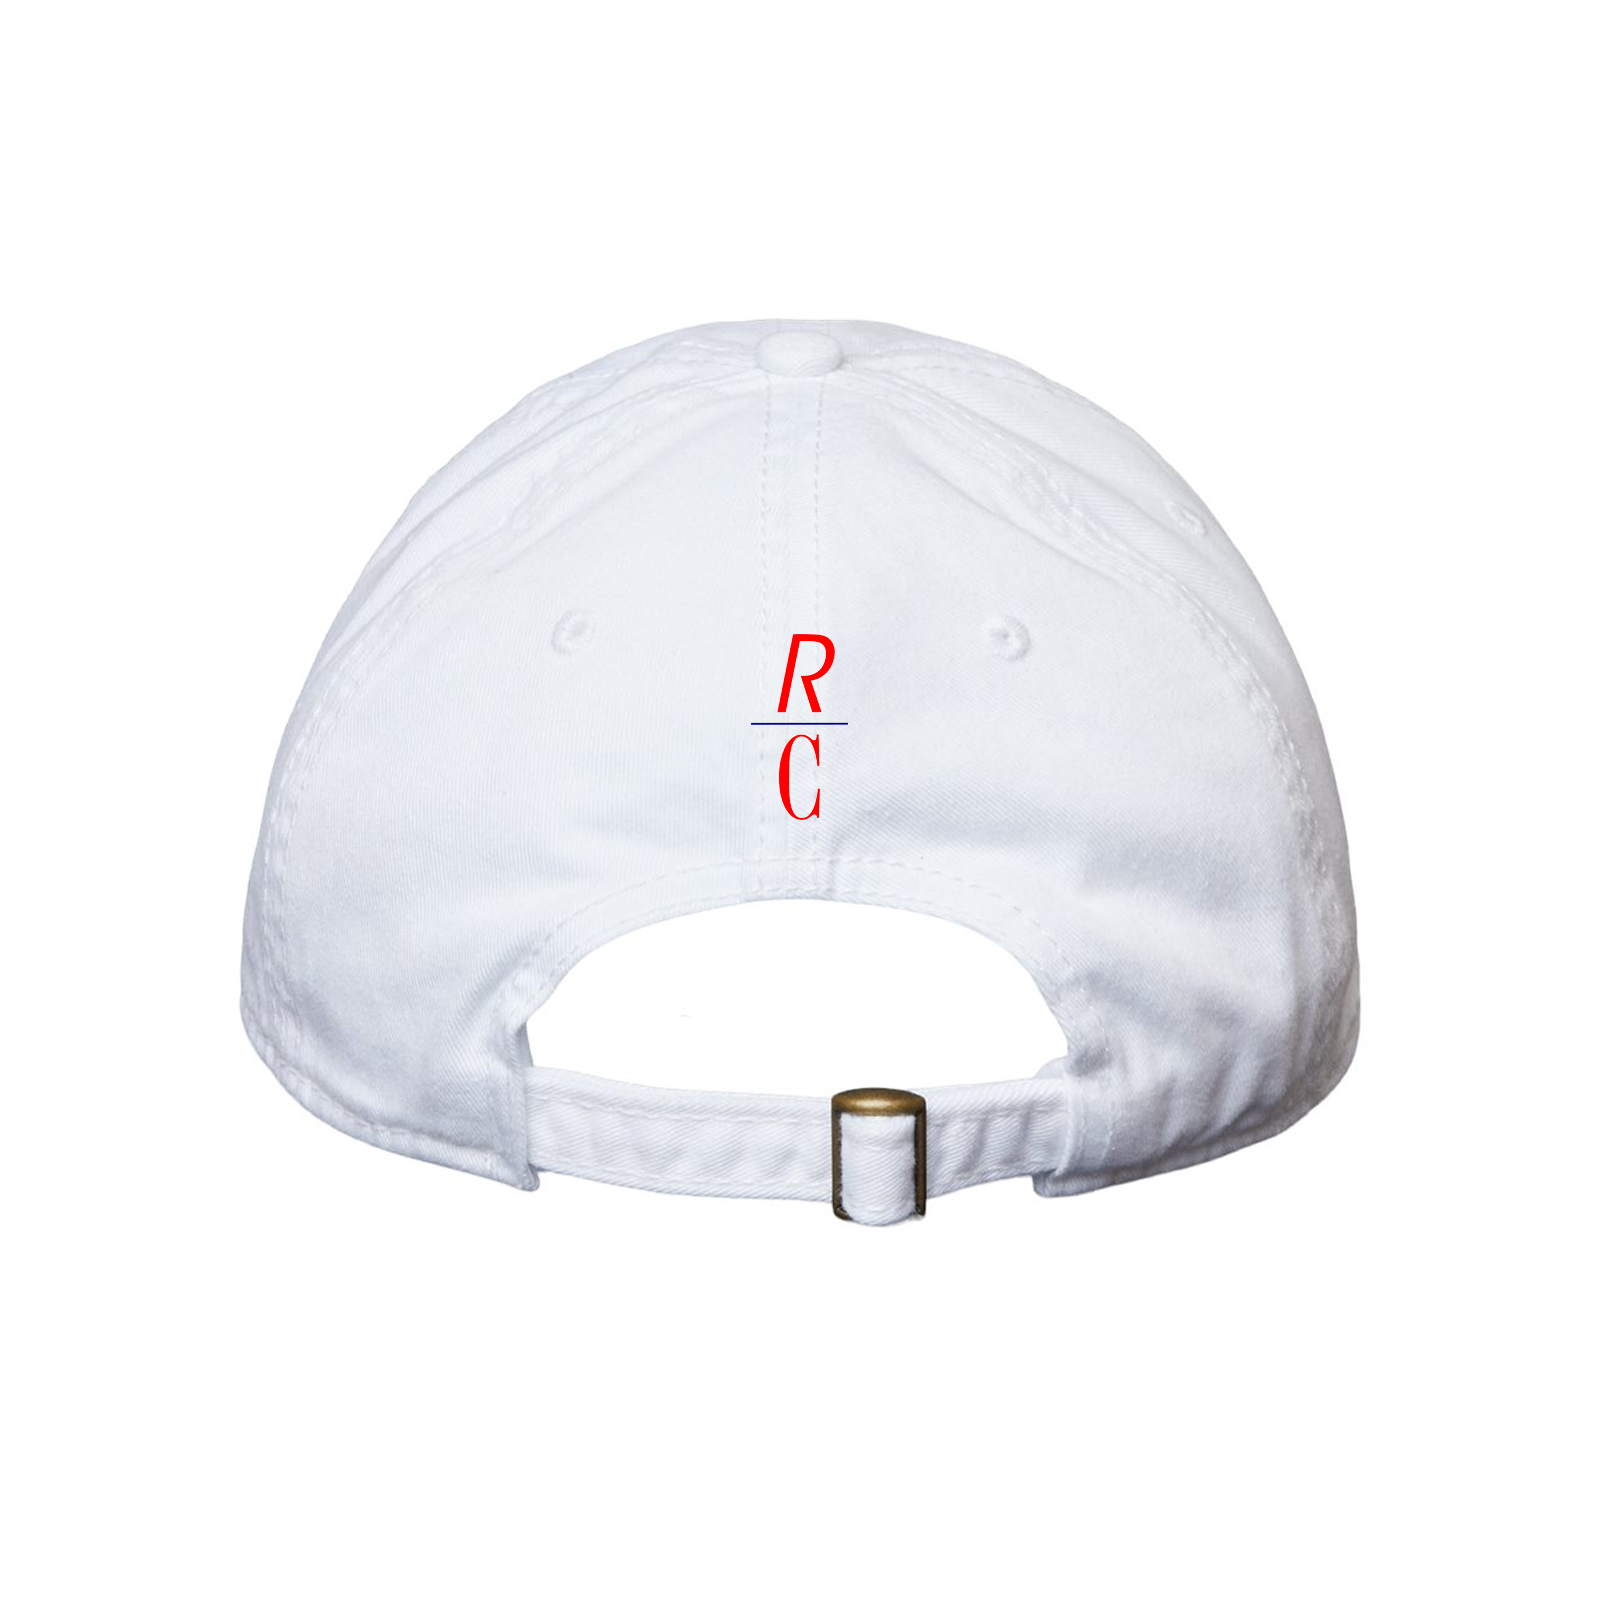 CAP AMERICA i1002 - Relaxed Golf Dad Hat